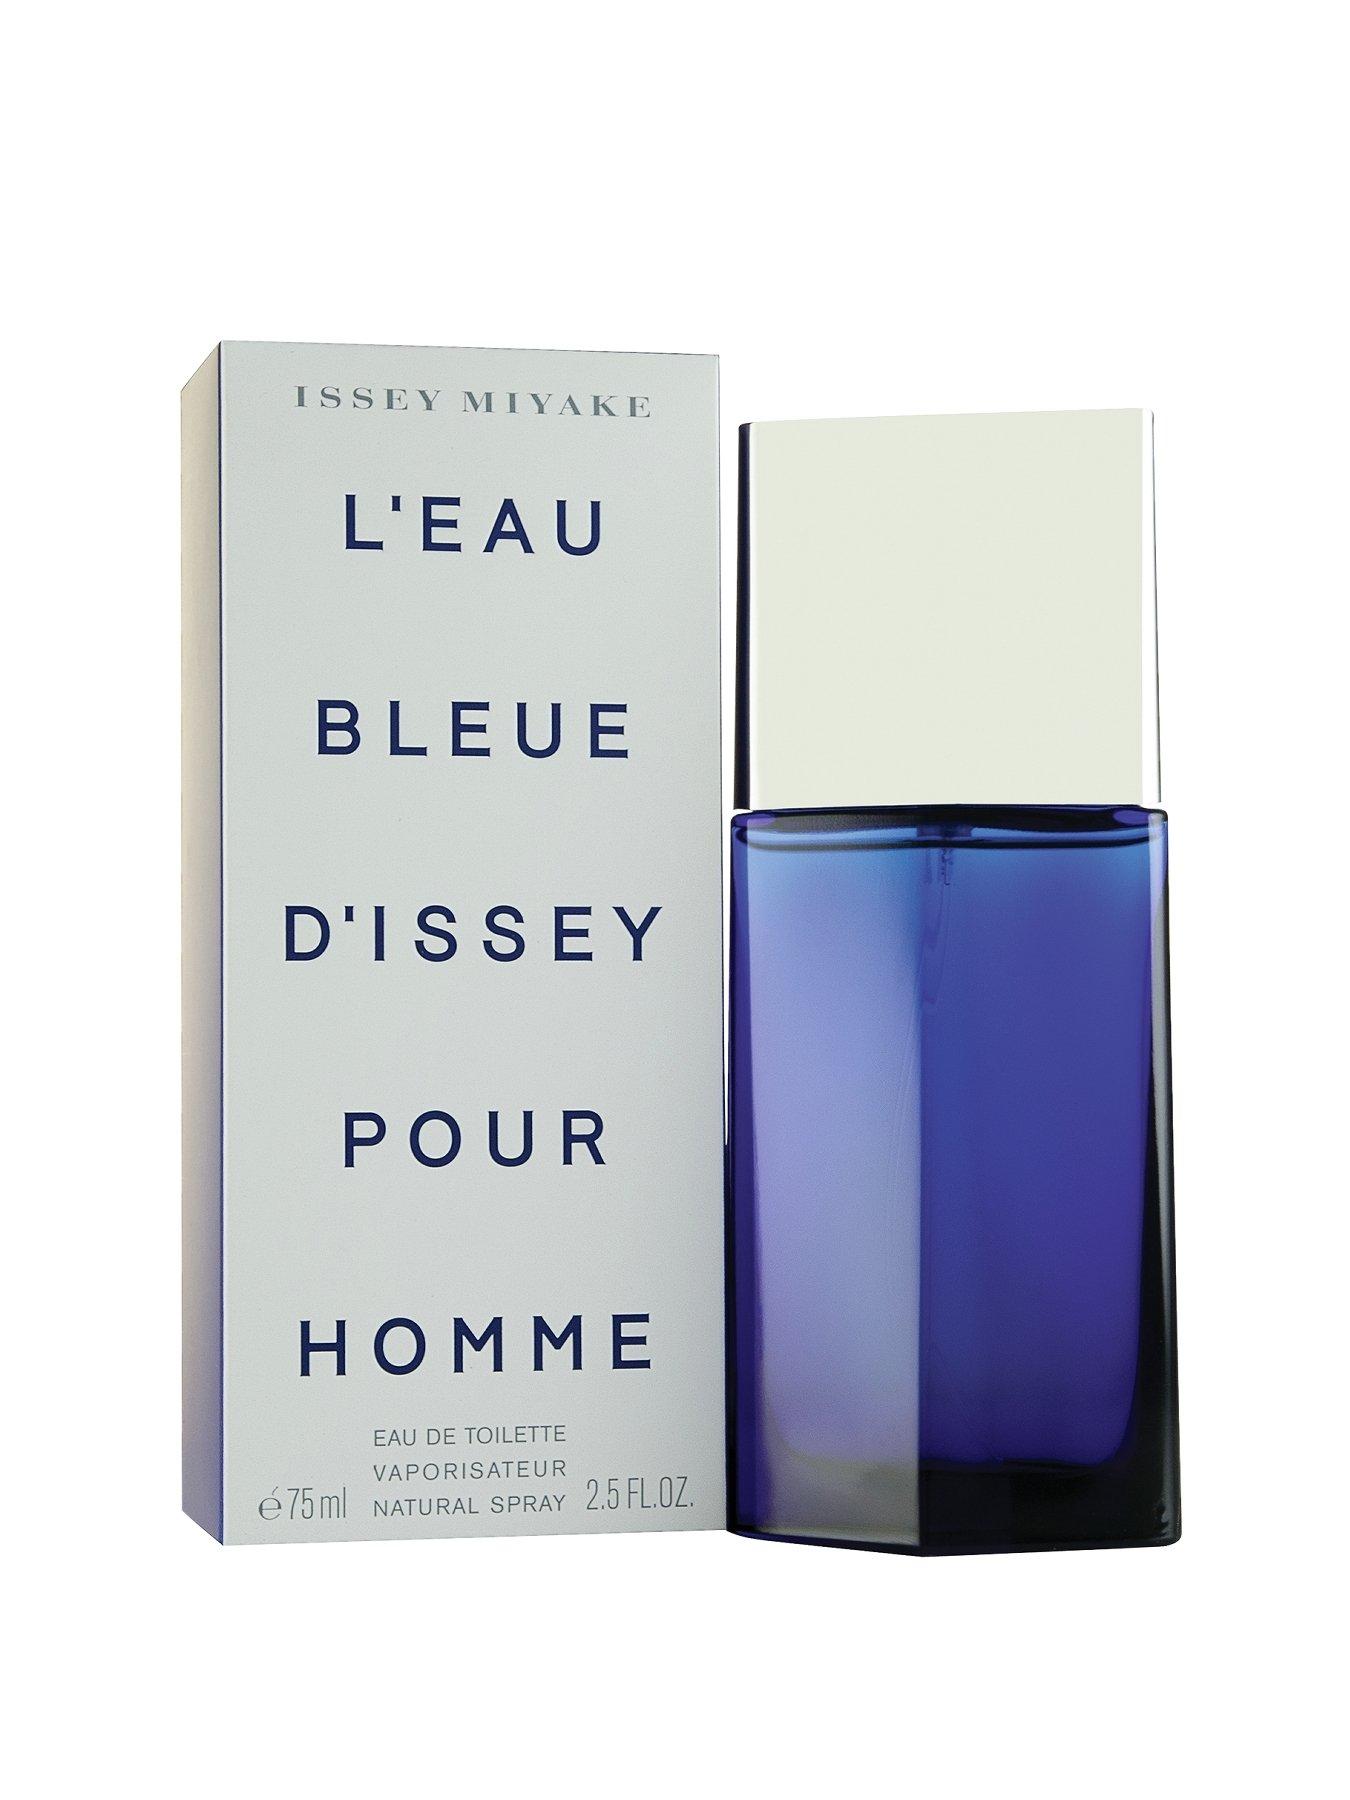 Issey Miyake Nuit D'Issey Parfum Fragrance Review - Here's What It Smells  Like